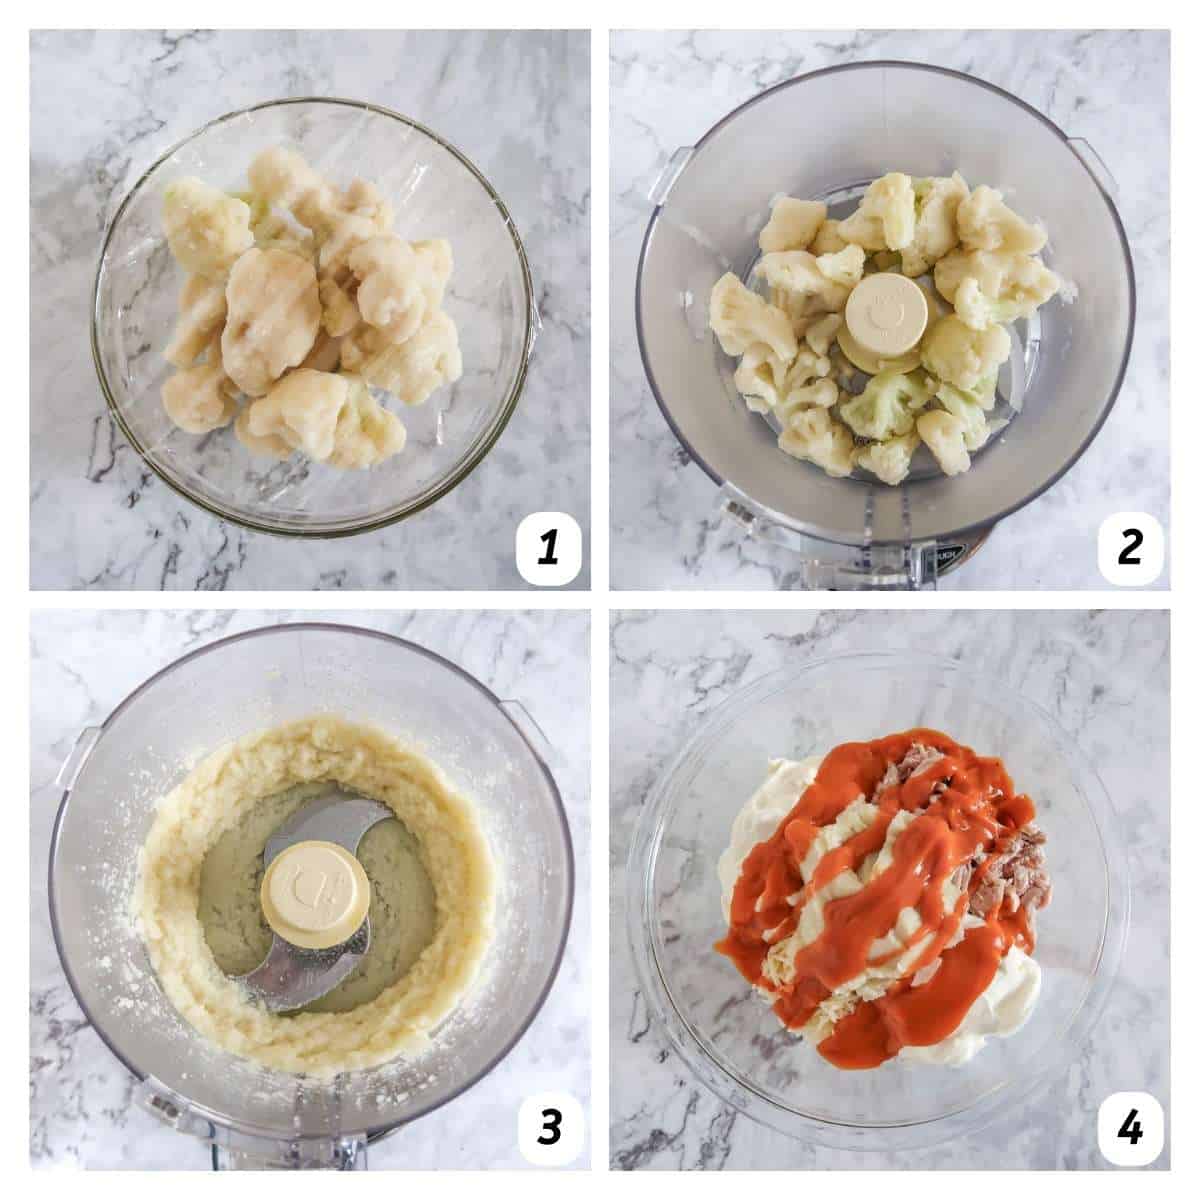 Four panel grid of process shots 1-4 - cooking and blending cauliflower, and combining with the rest of the ingredients.